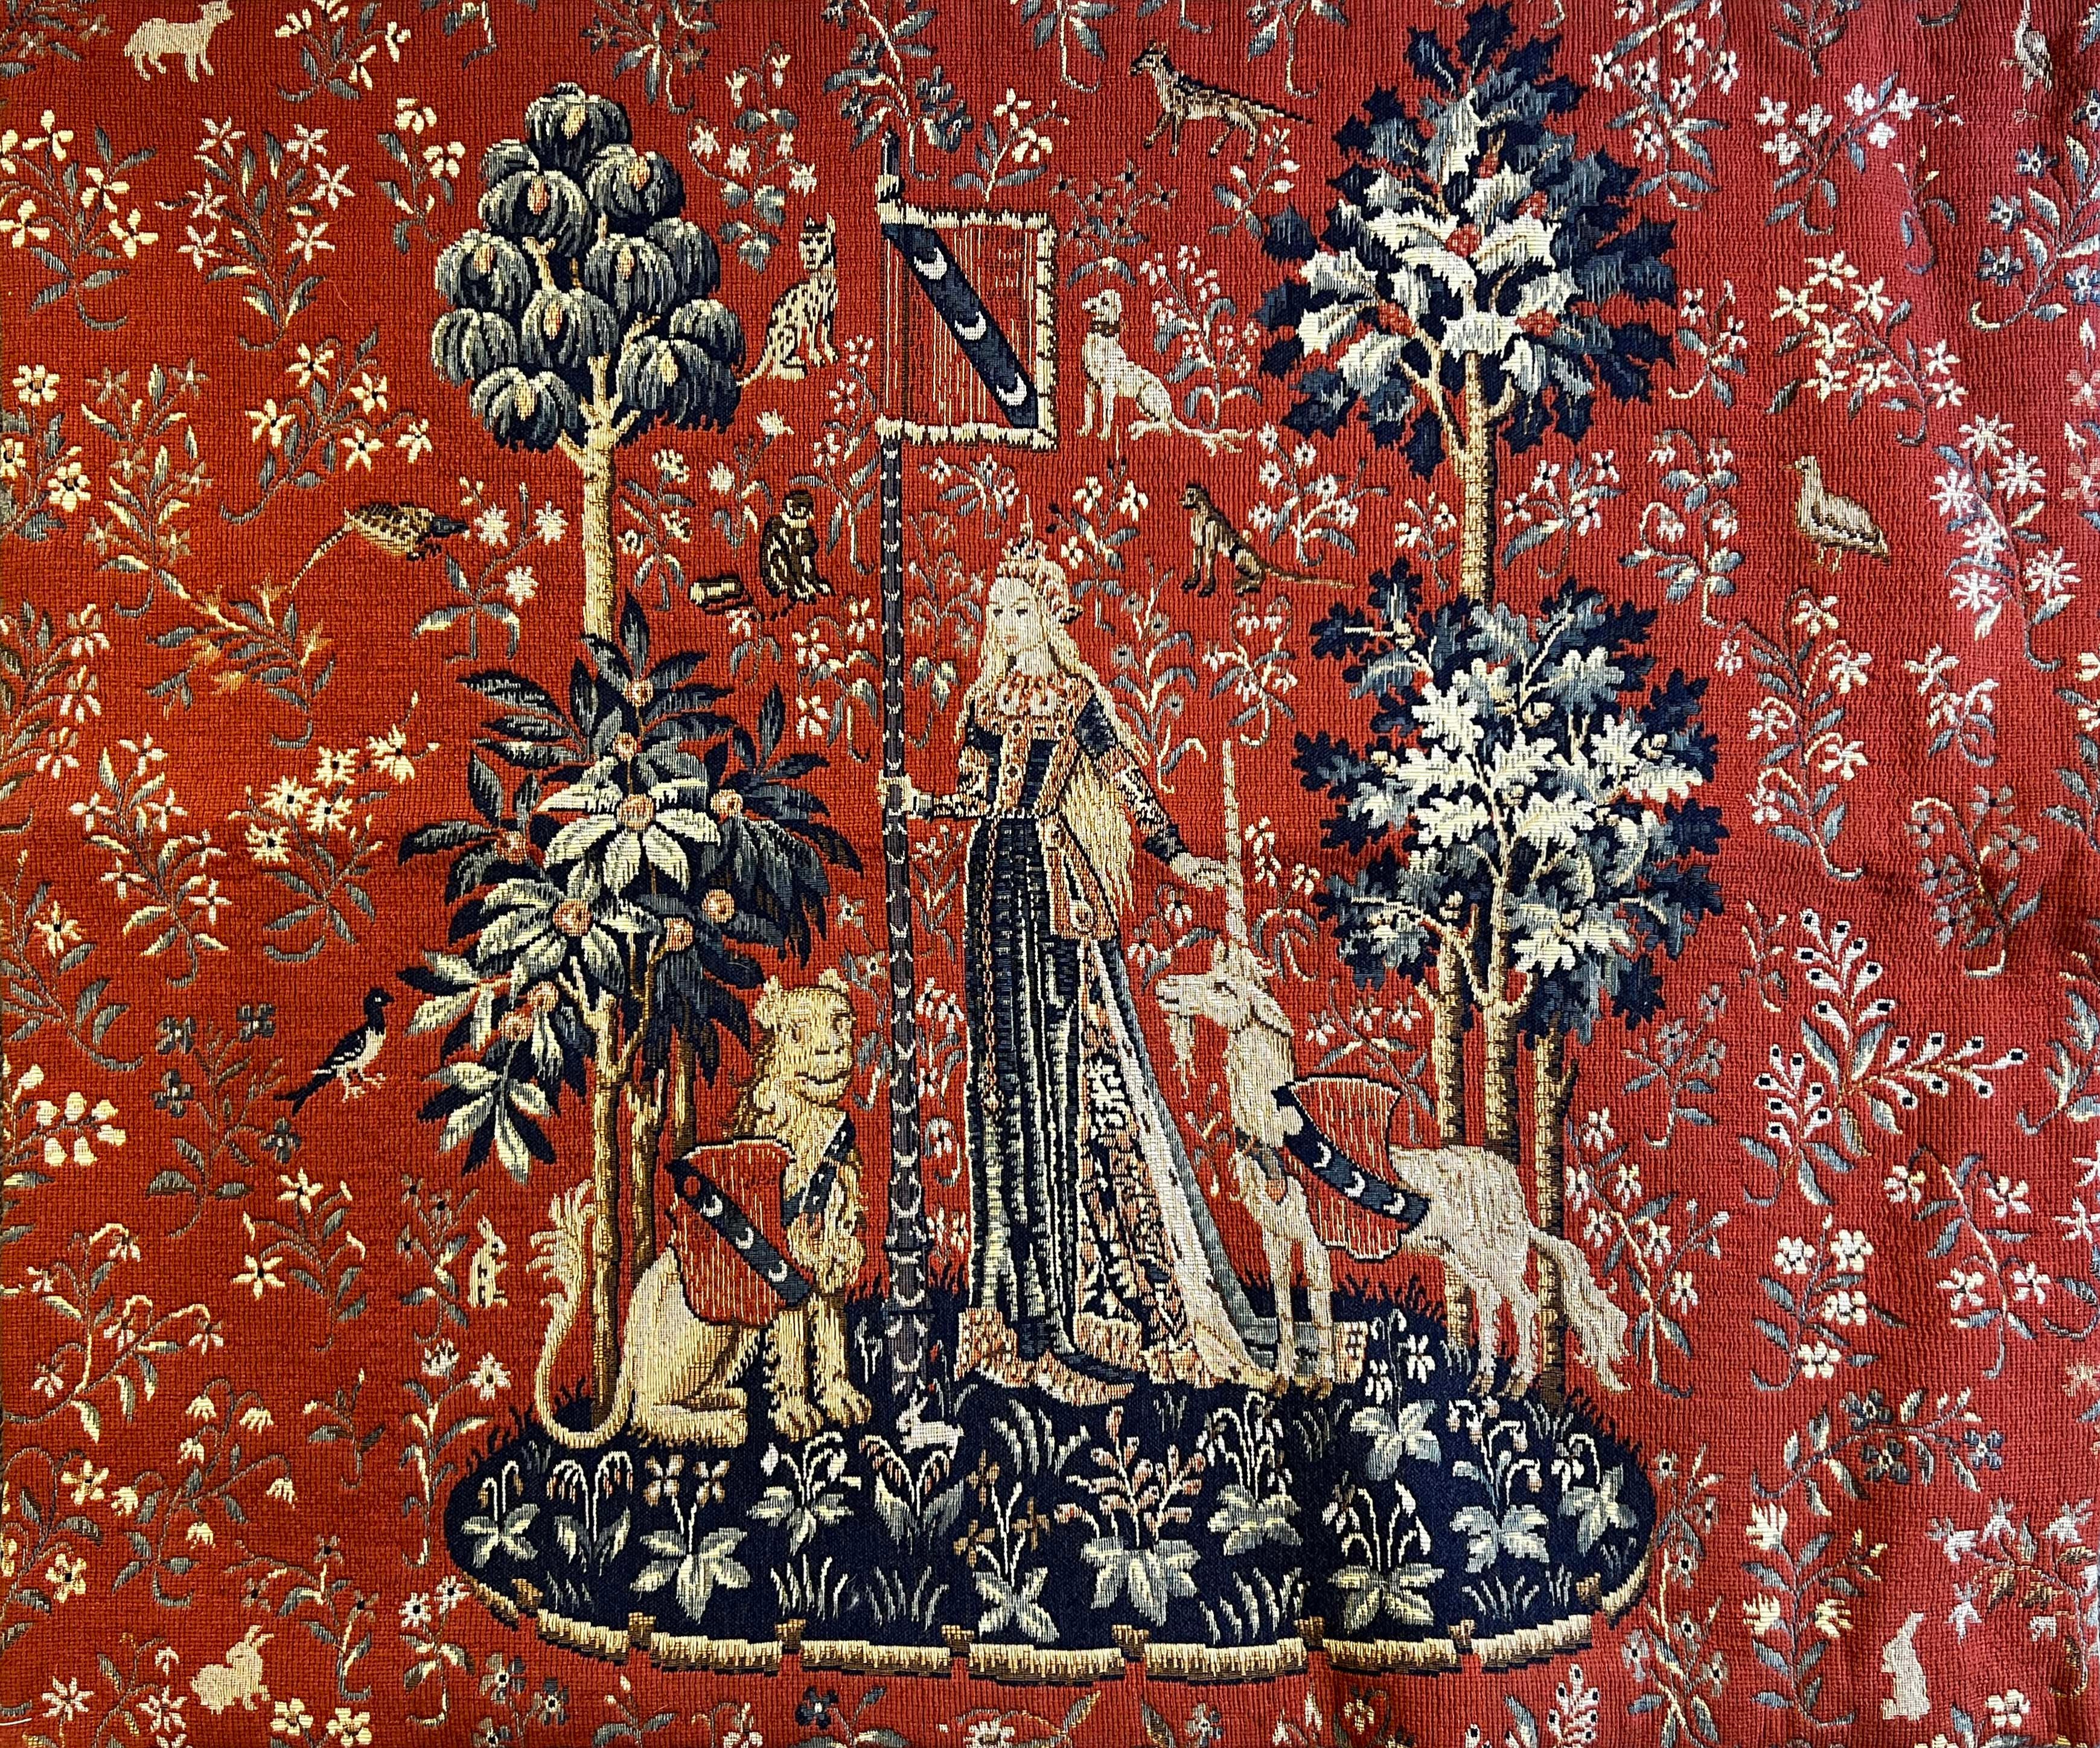 984 - Jacquard Tapestry "Touch" is from the Lady with the Unicorn Series For Sale